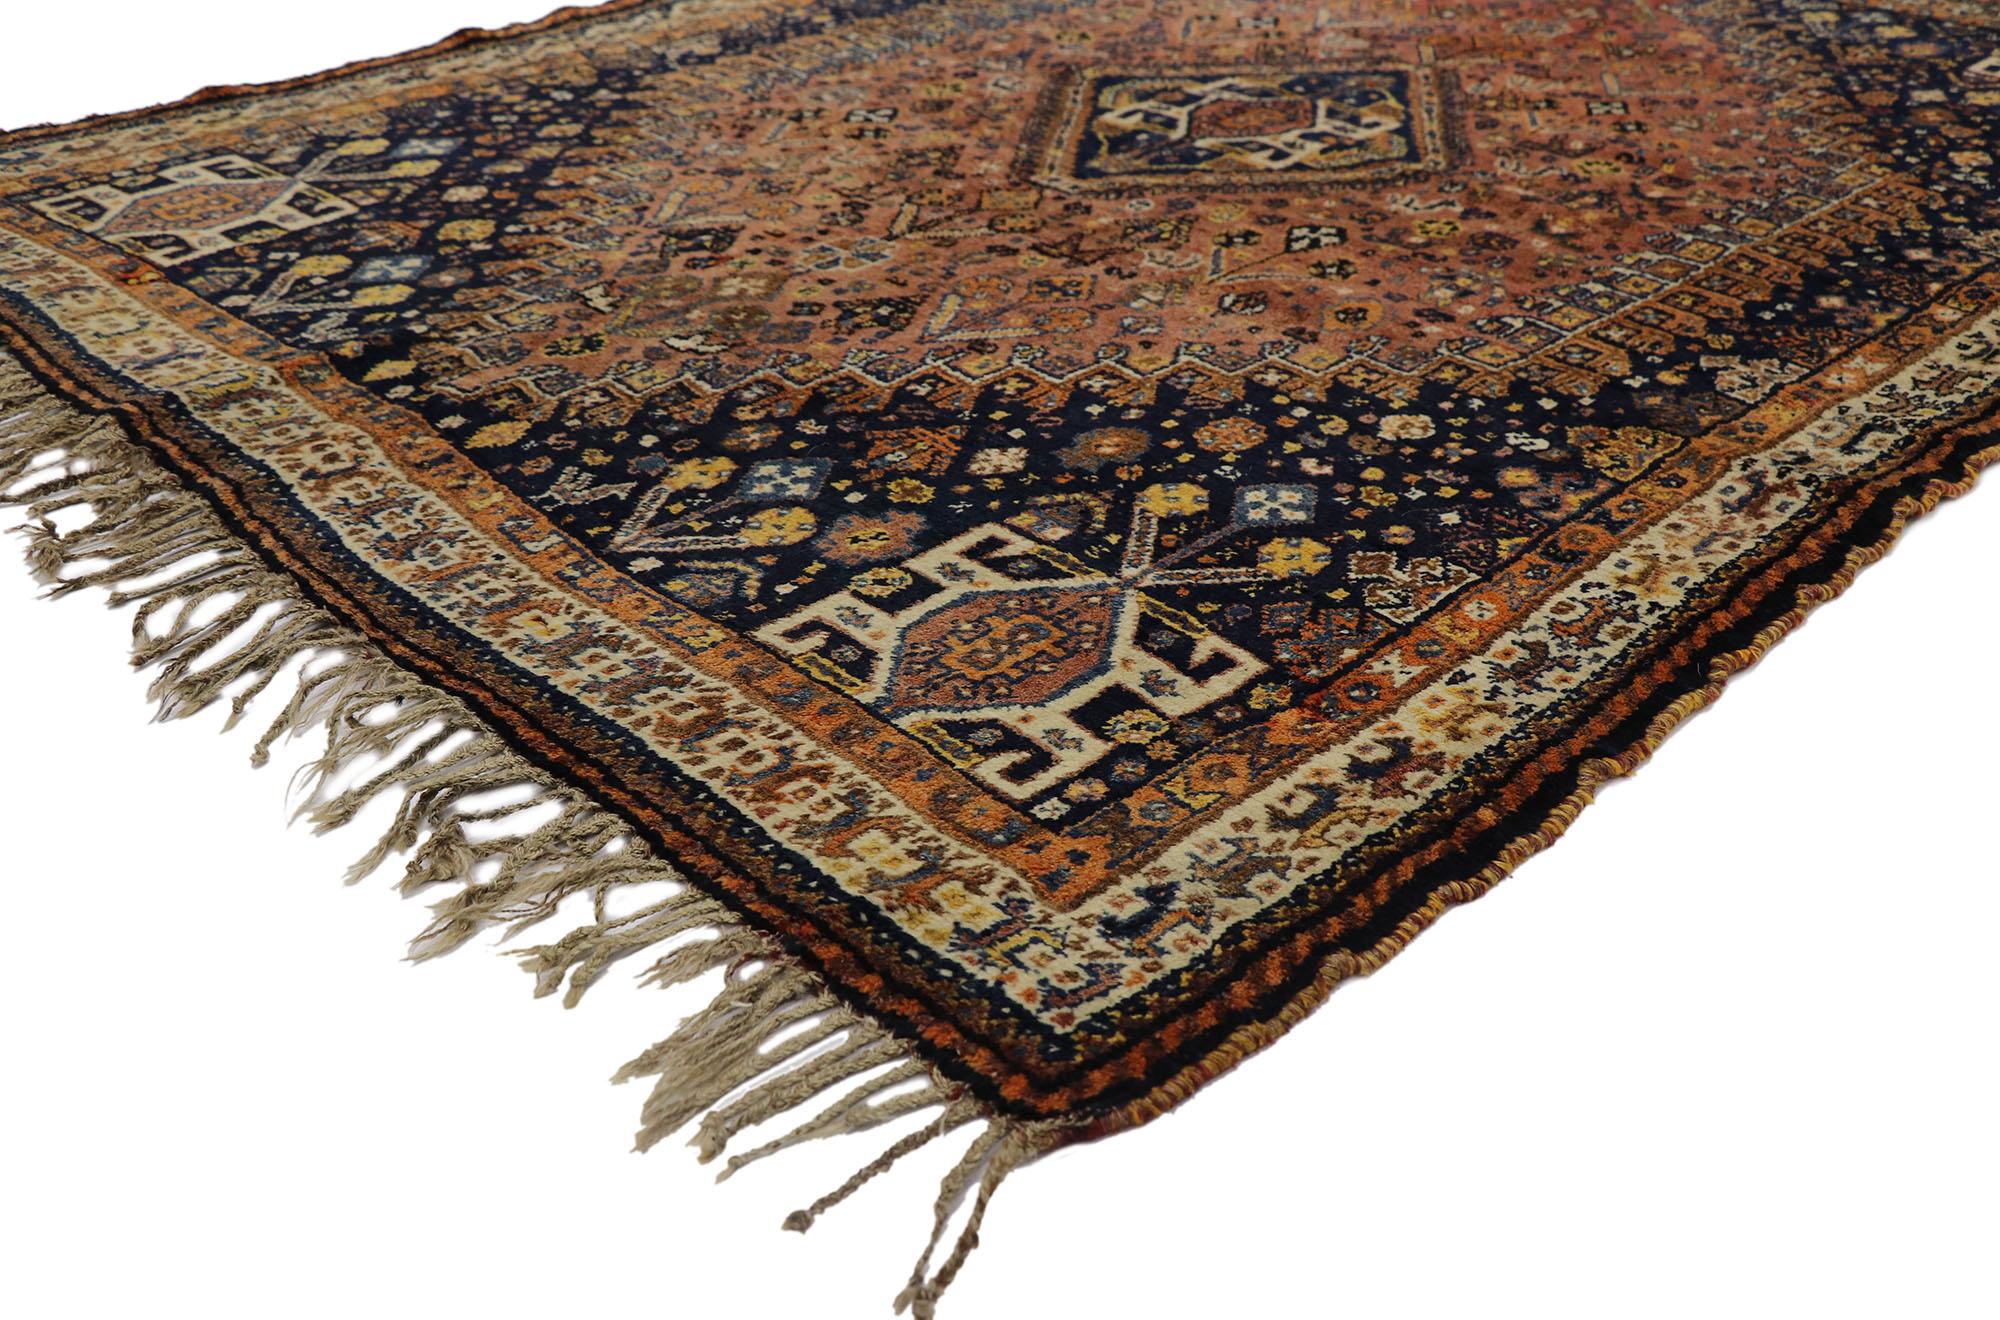 21686 Antique Persian Shiraz rug with Tribal Style 05'01 x 06'08. With its rustic sensibility and tribal style, this hand-knotted wool antique Persian Shiraz rug will take on a curated lived-in look that feels timeless while imparting a sense of